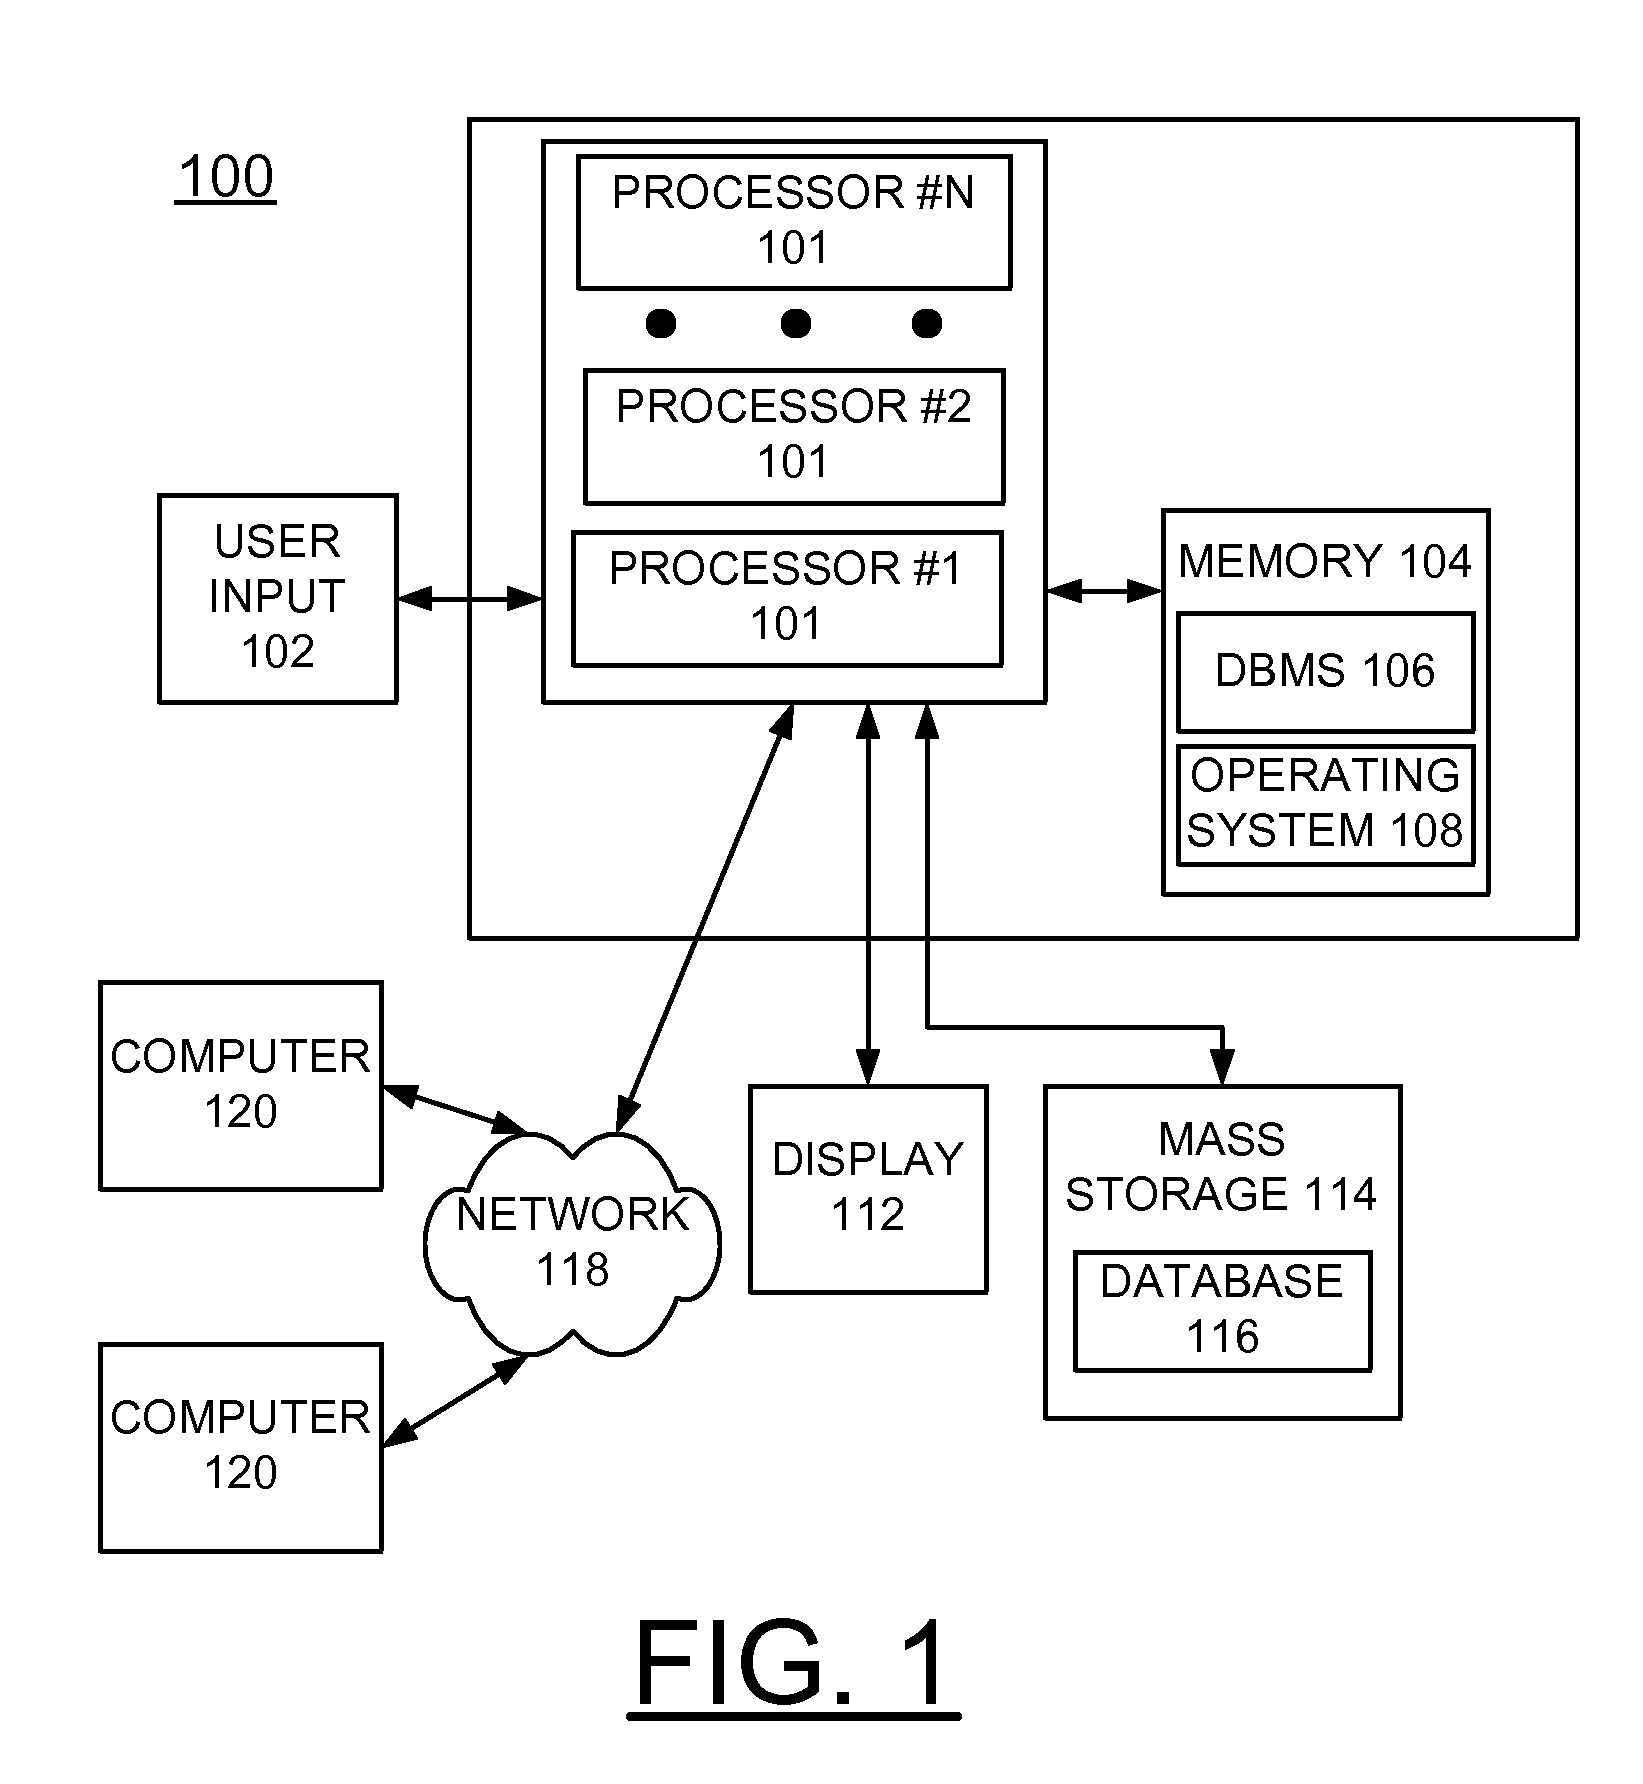 Implementing dynamic processor allocation based upon data density